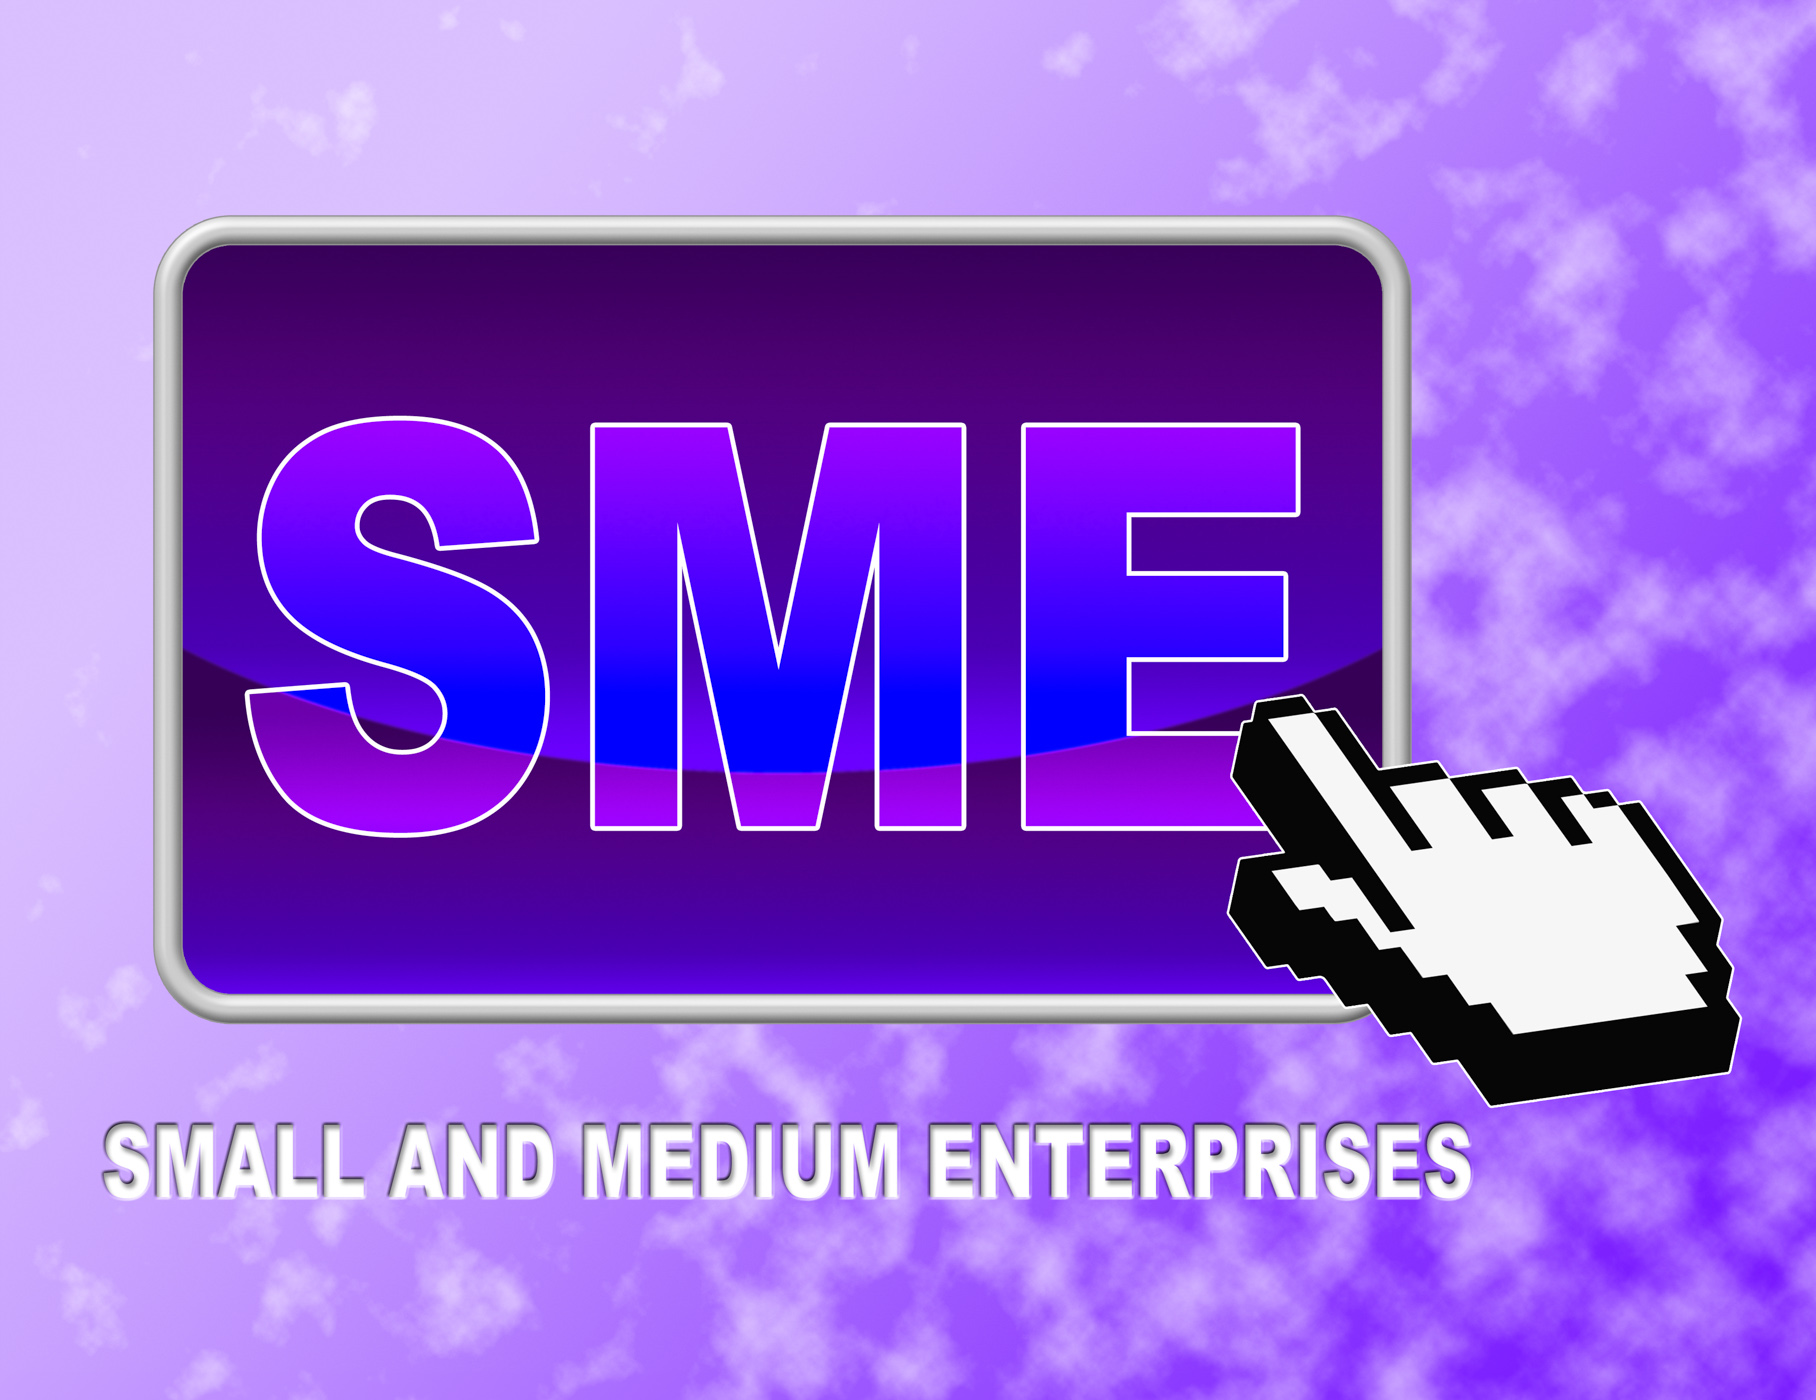 Sme button indicates web site and business photo